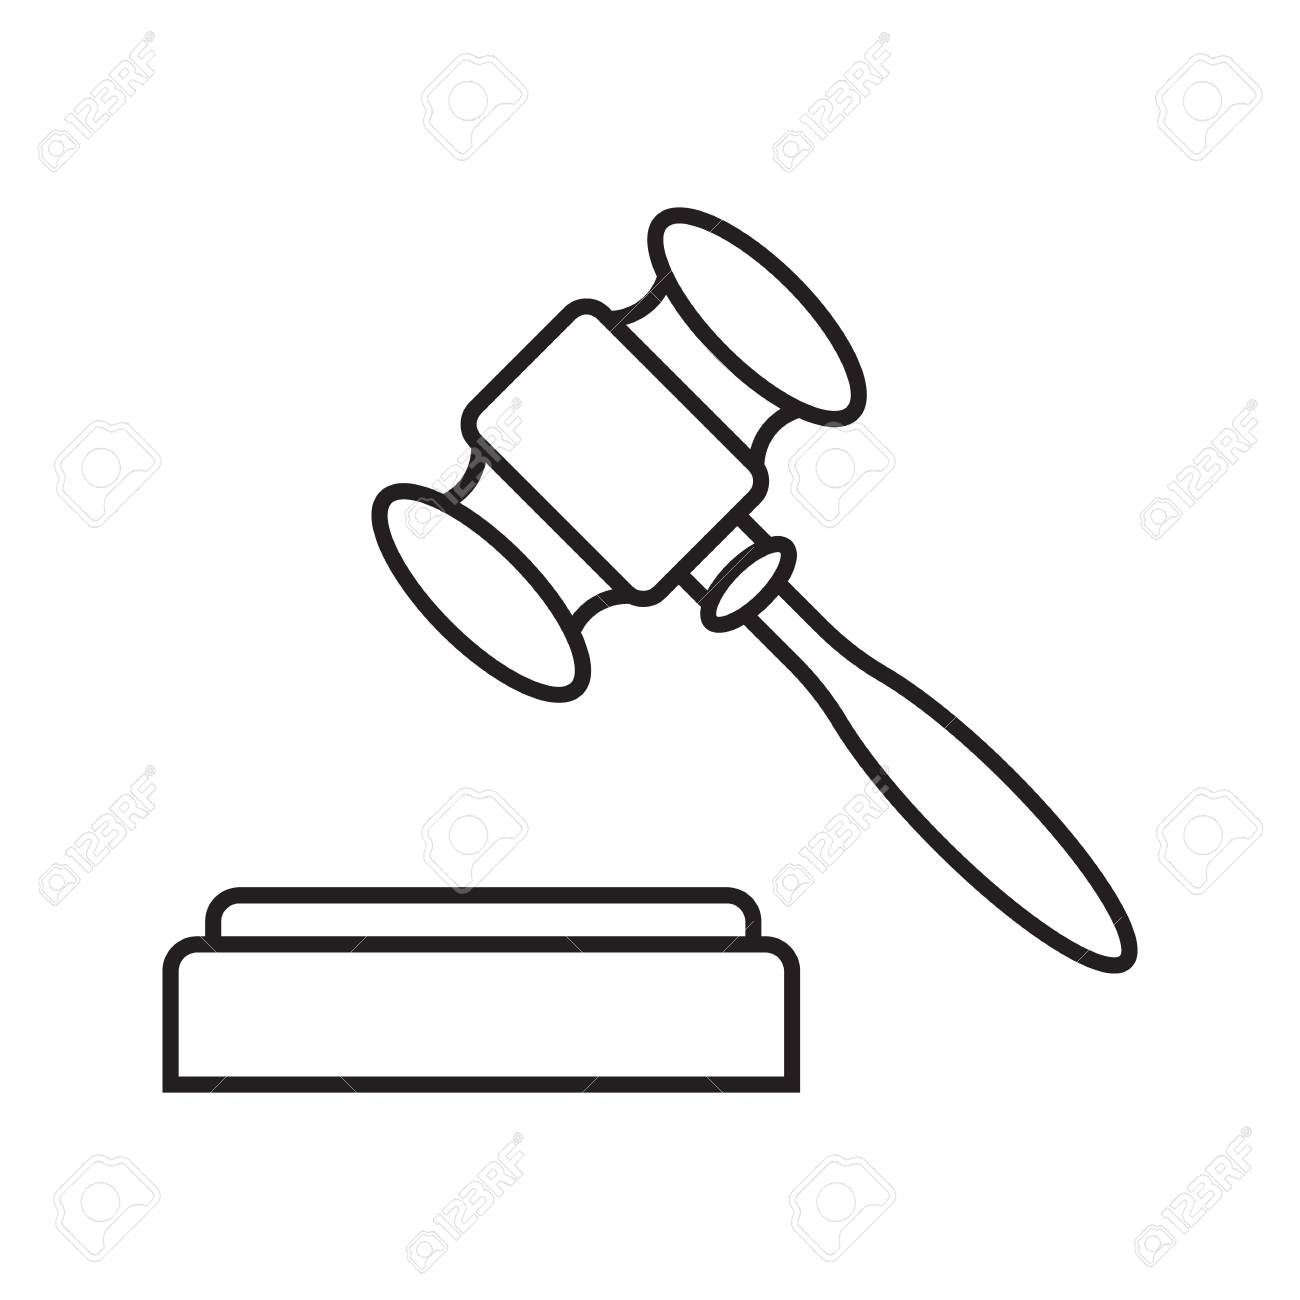 Gavel drawing clipart.